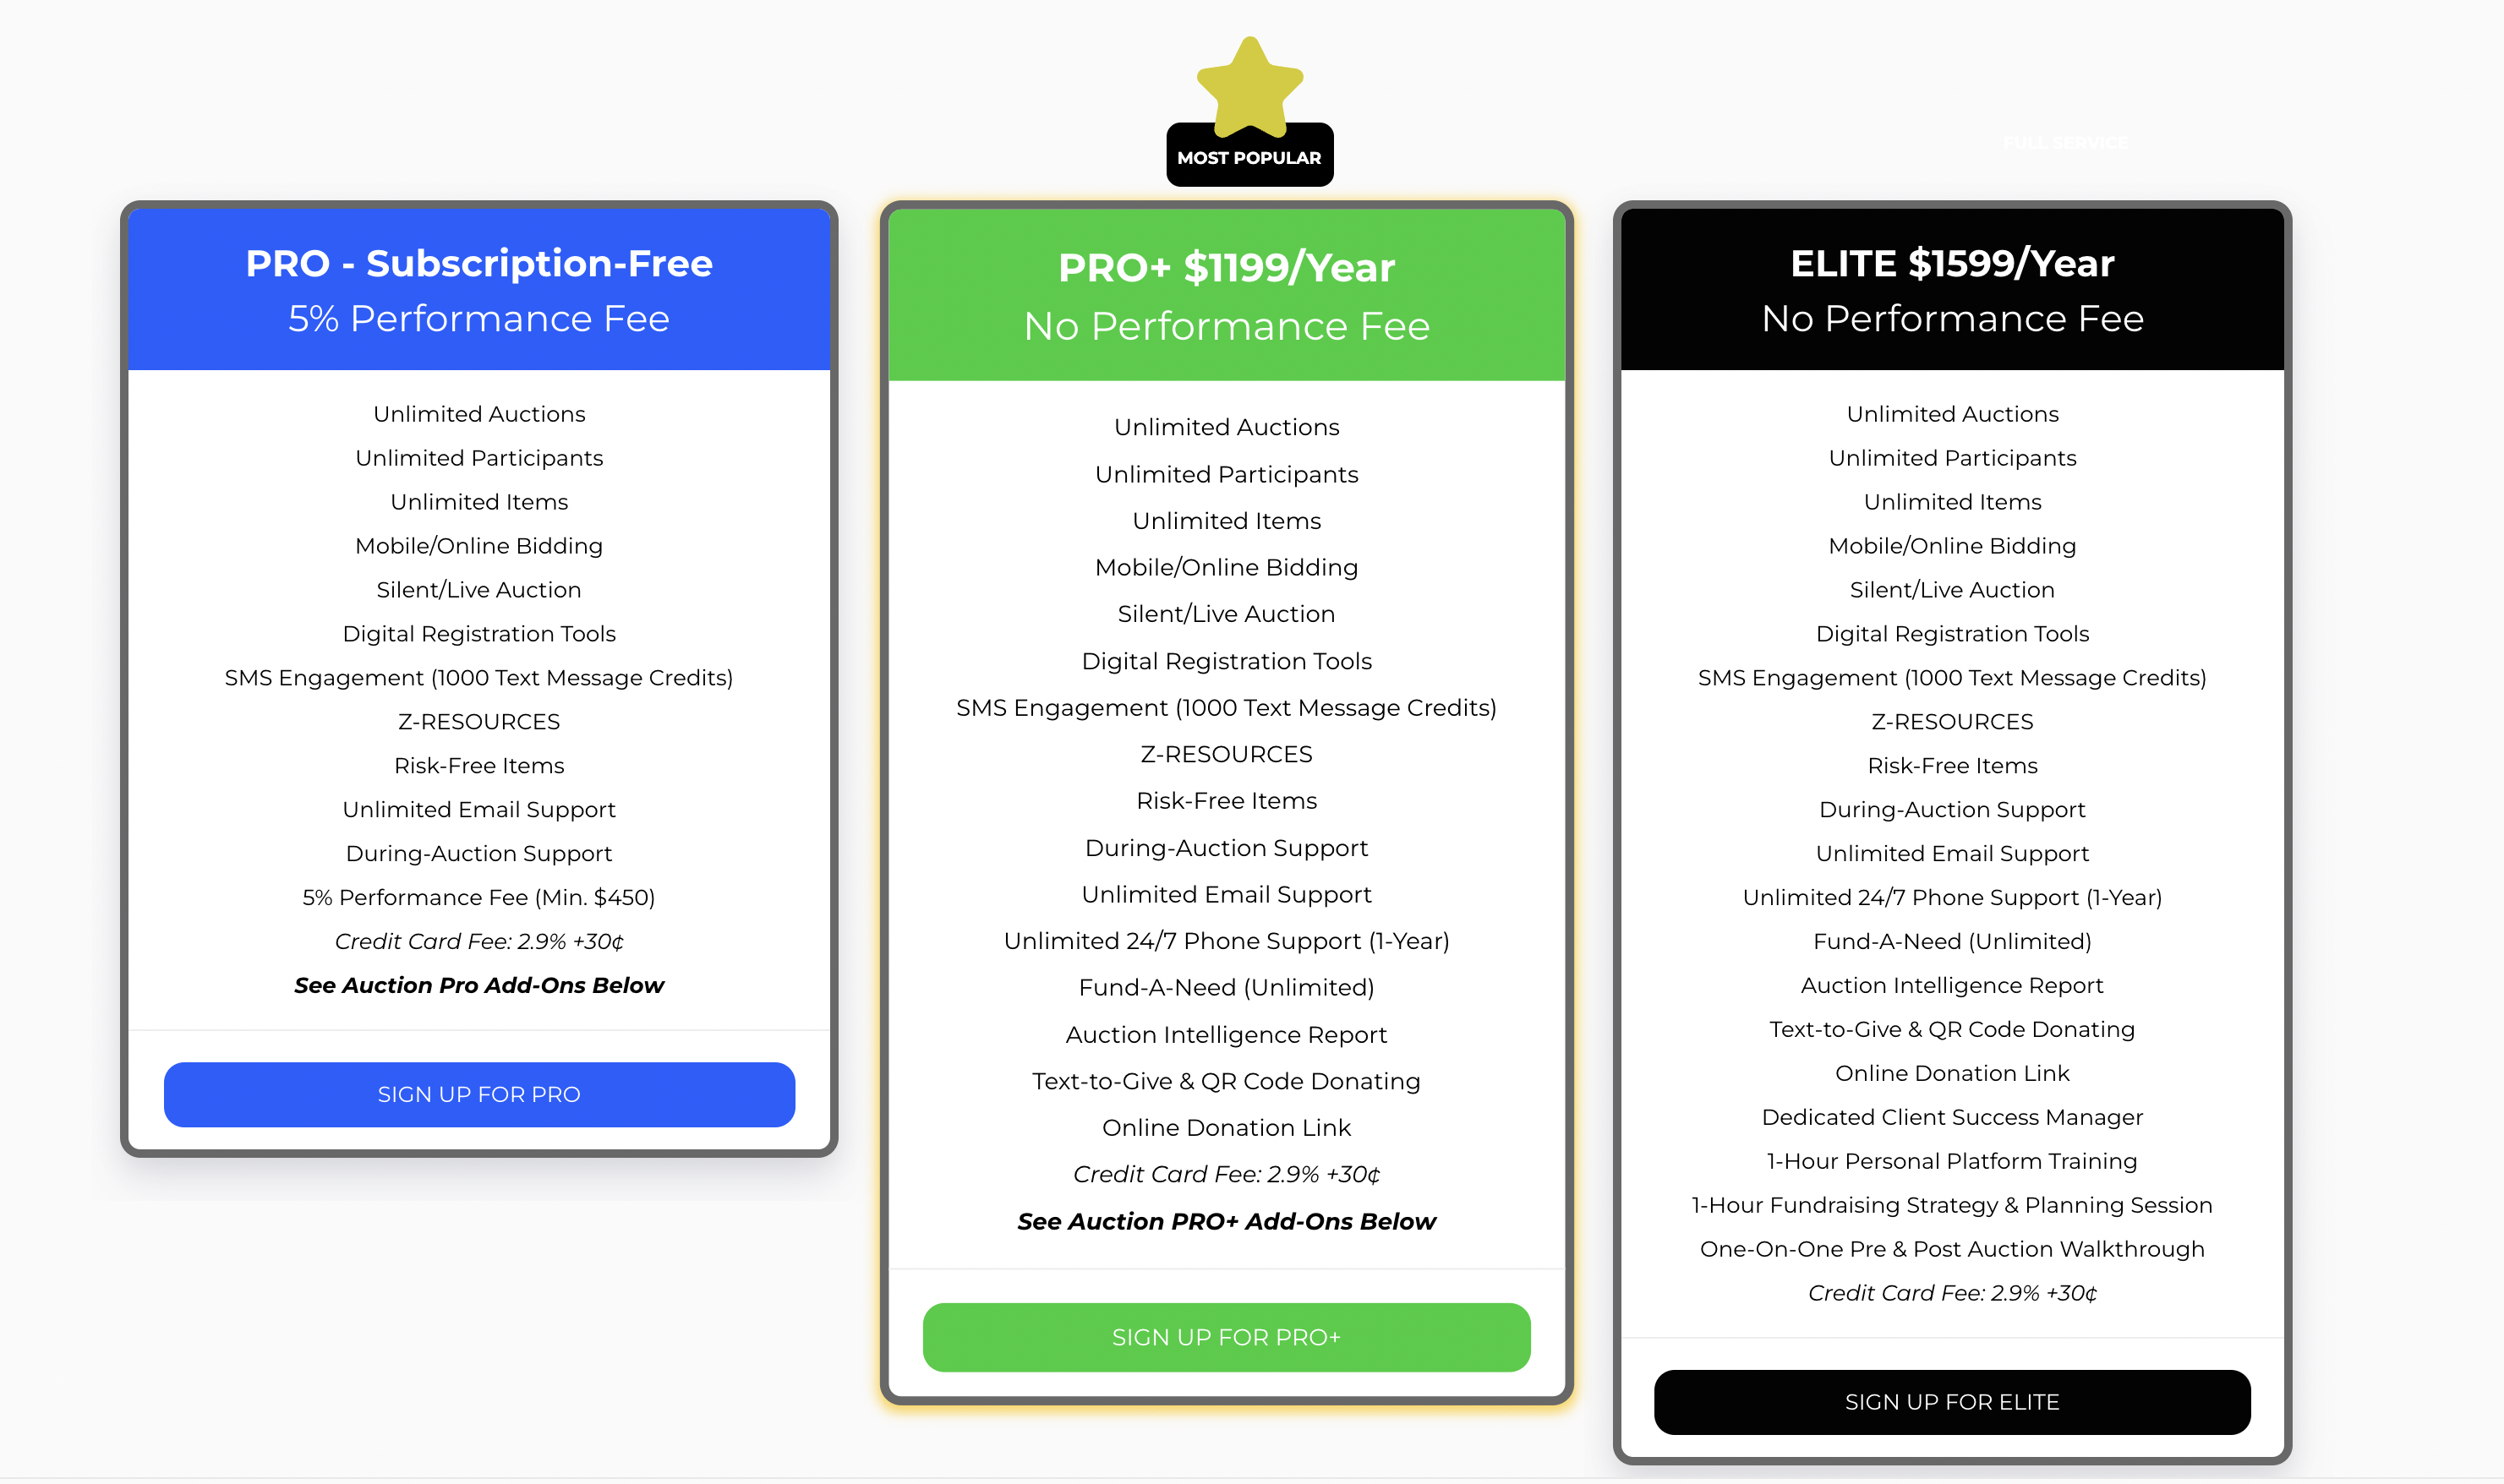 Select from 3 plans: PRO (auction only & subscription-free) PRO+ (auction & giving) and ELITE (auction,giving & dedicated client manager).